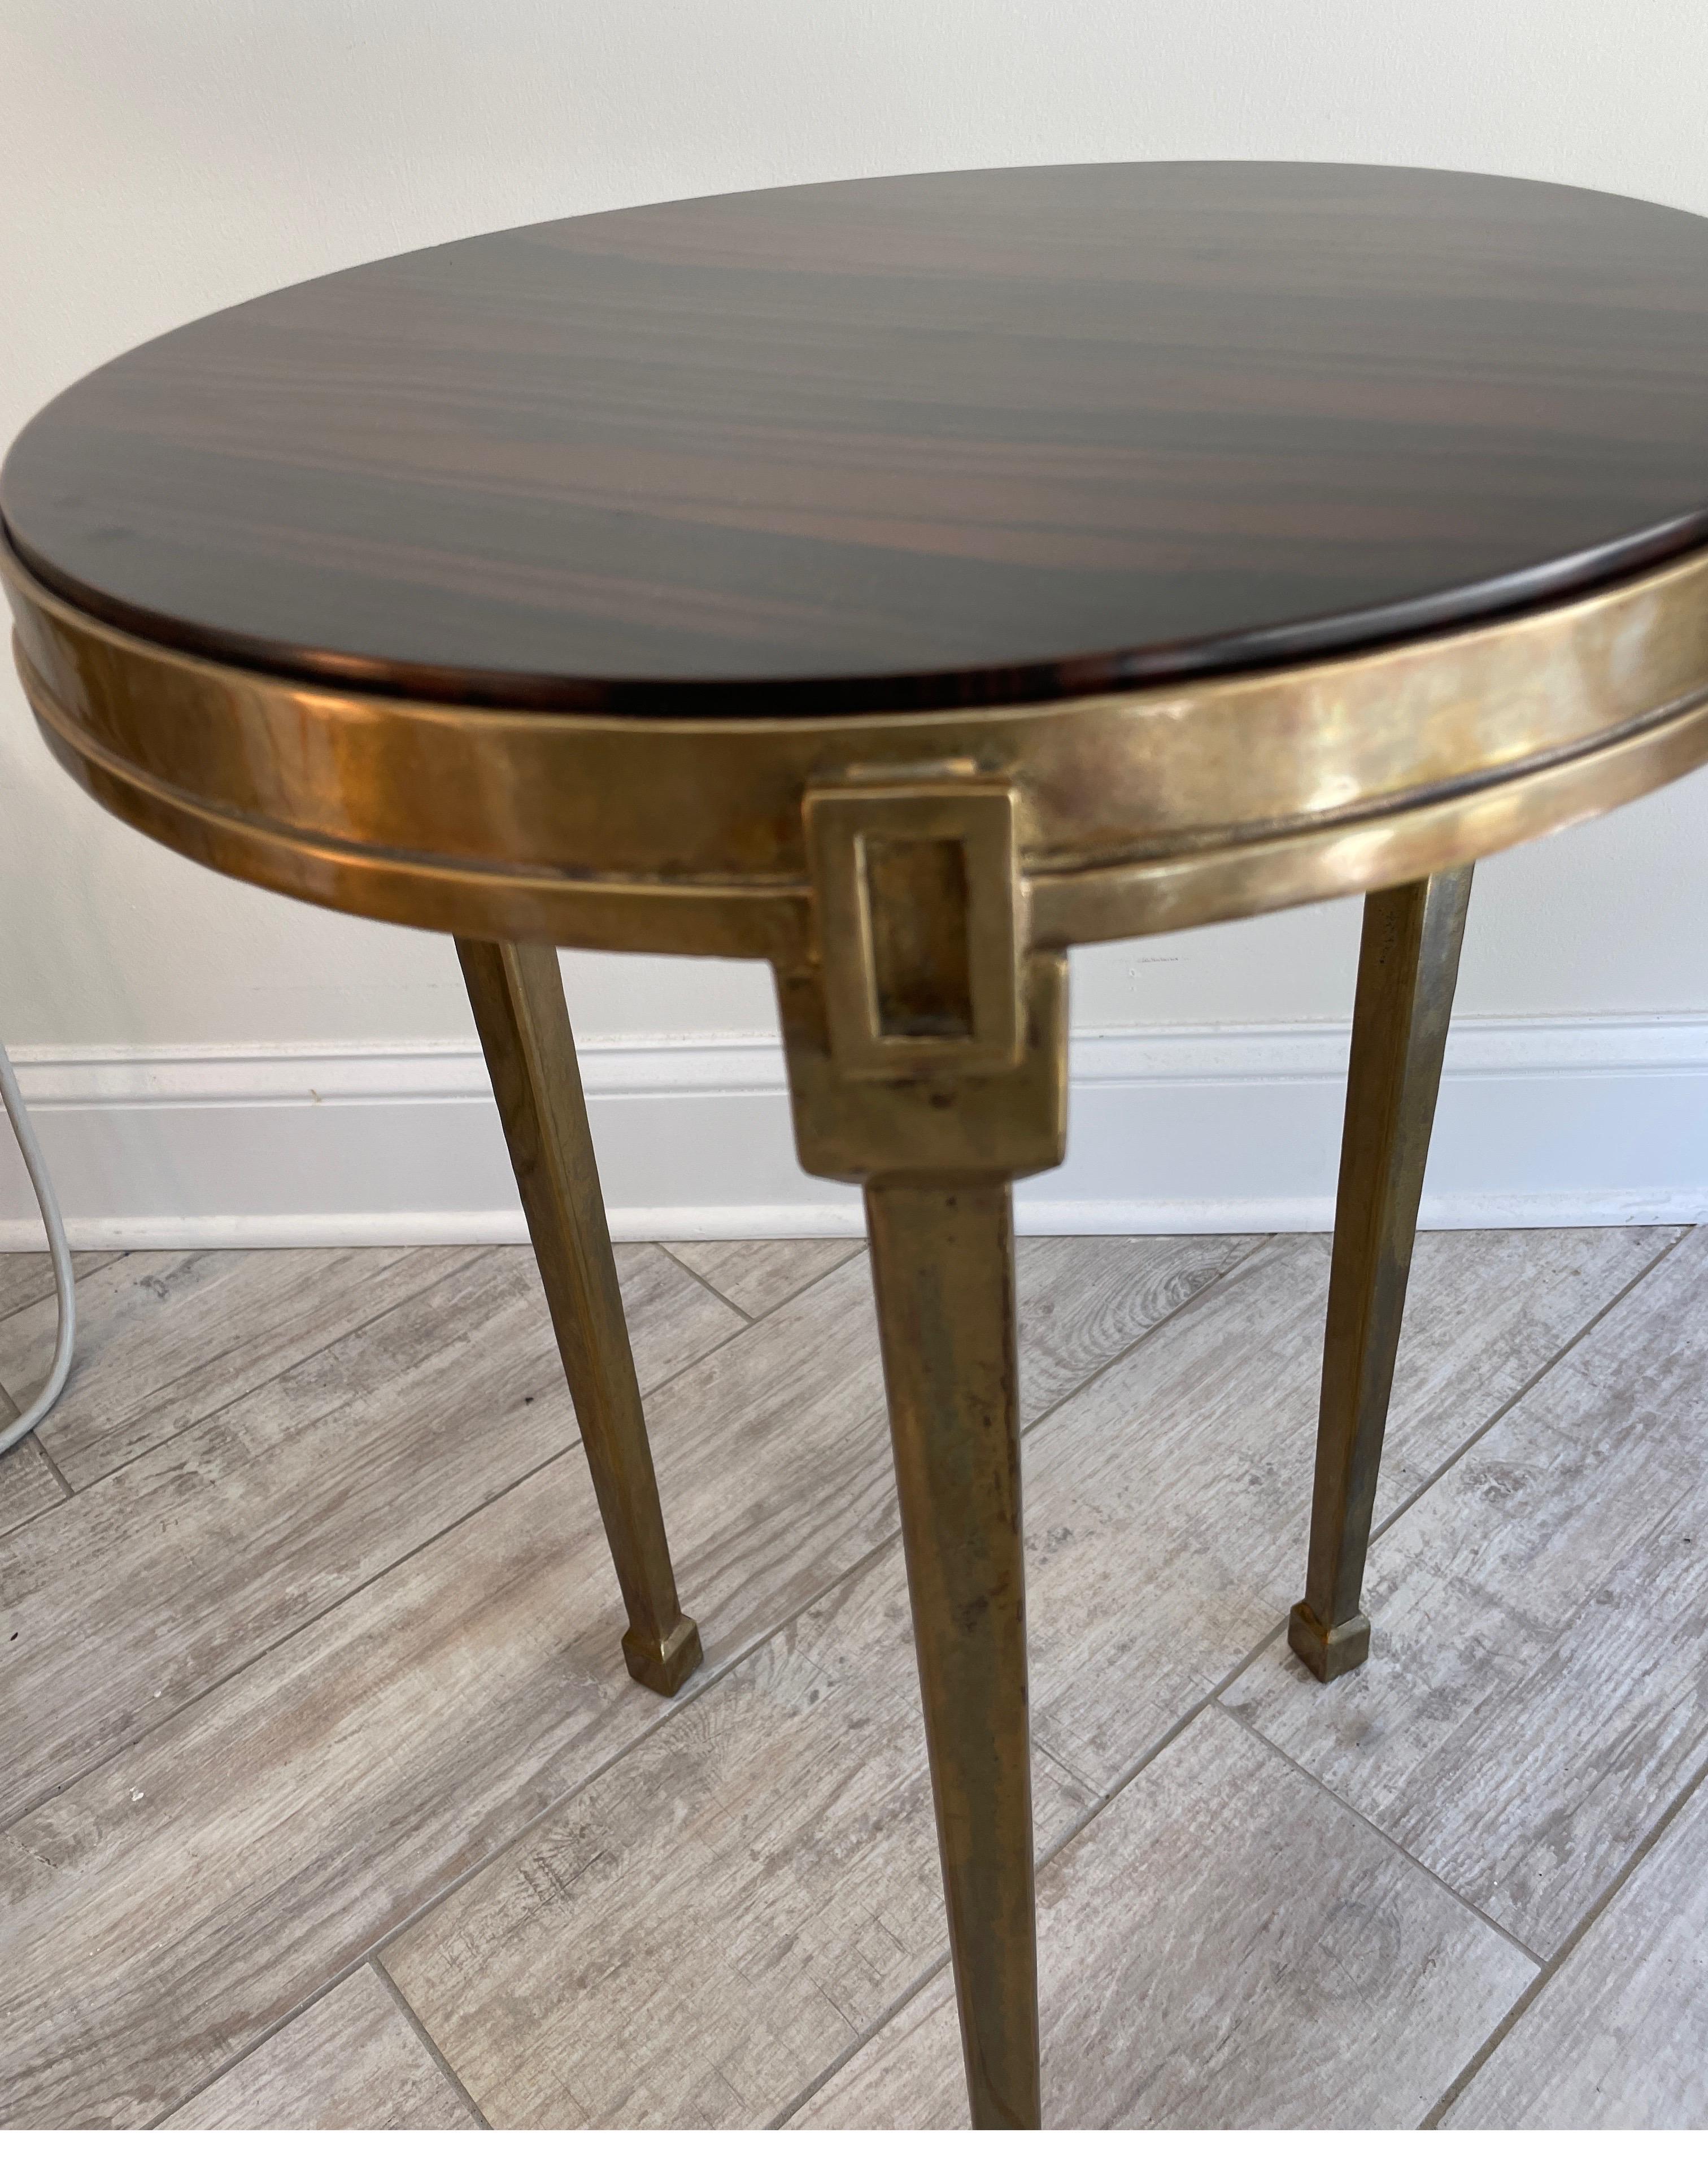 Vintage Italian Tigerwood & Brass Gueridon / Side Table In Good Condition For Sale In West Palm Beach, FL